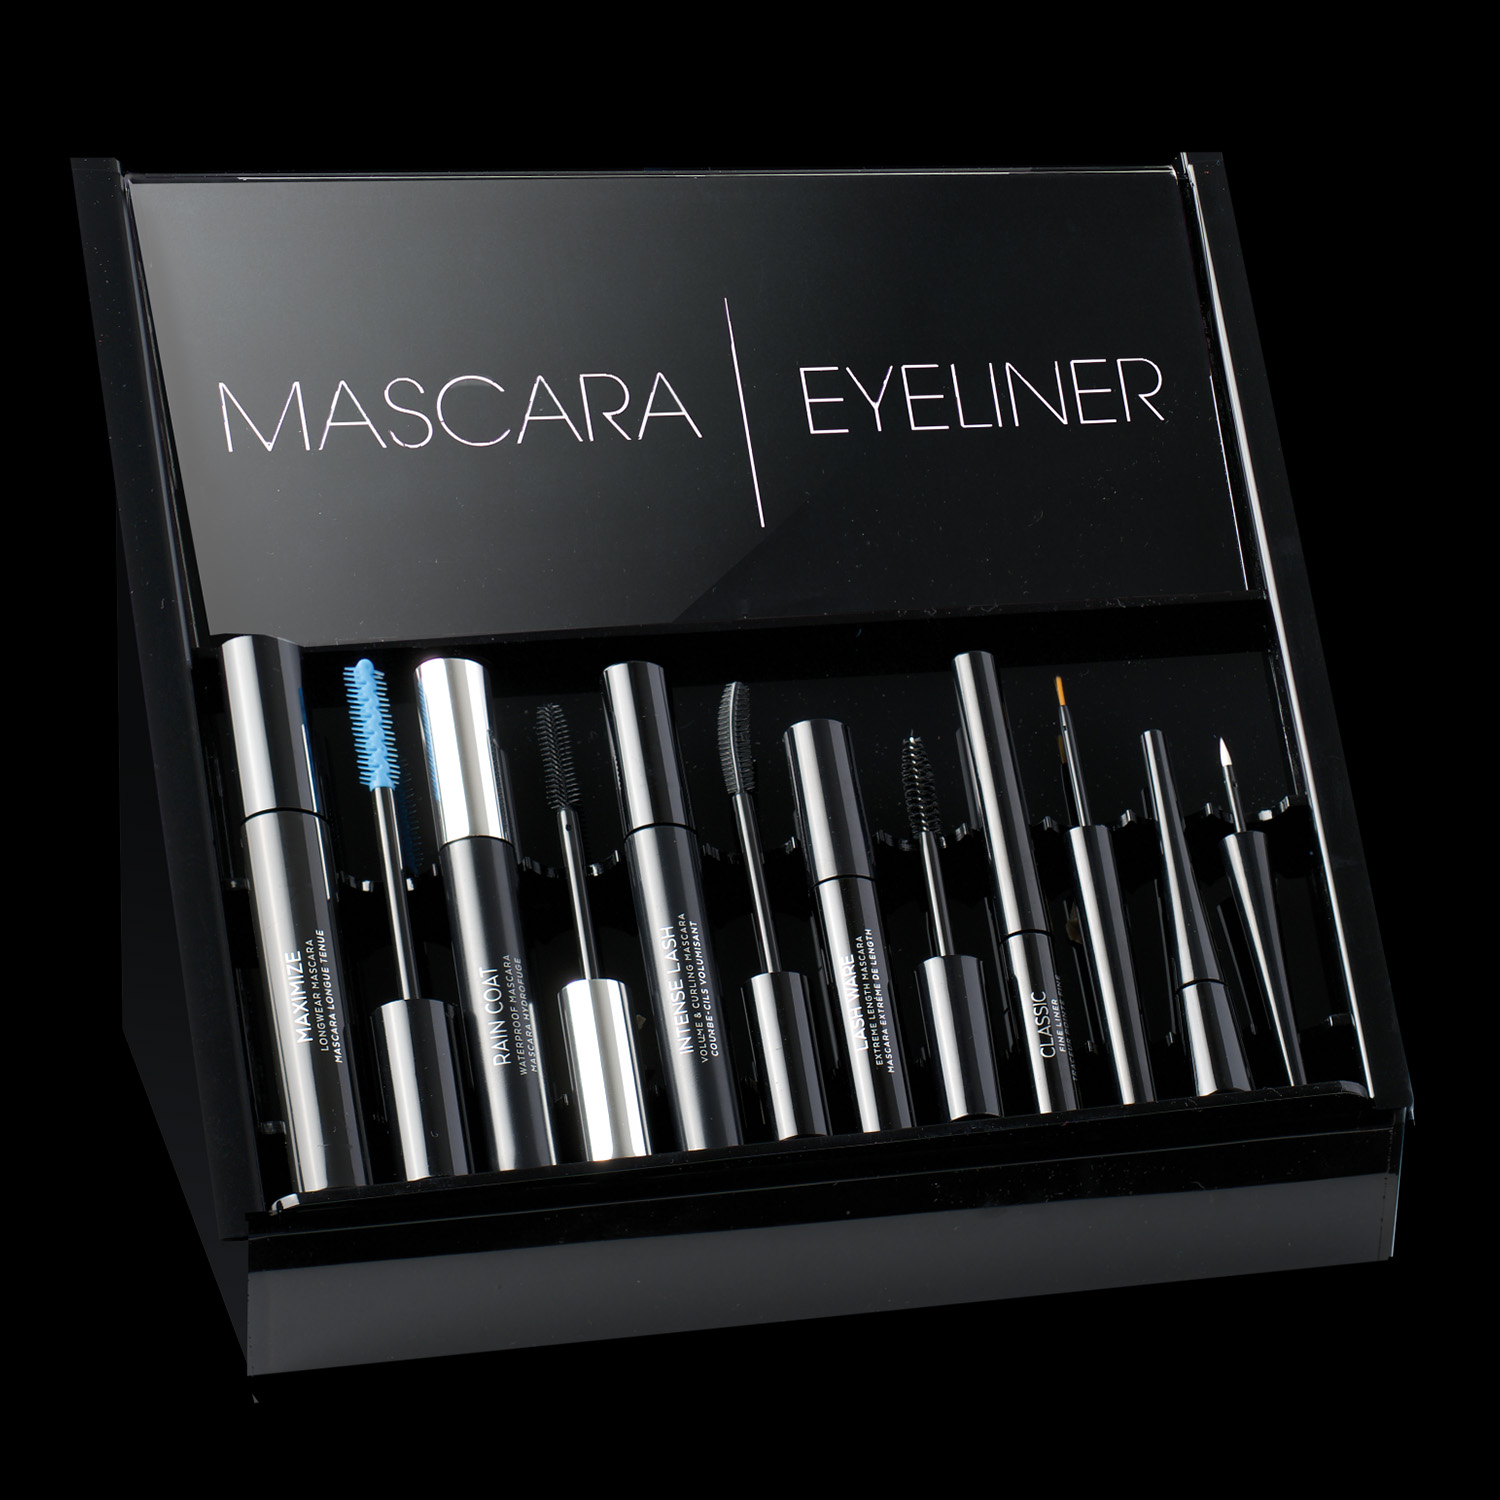 MASCARA/LINER<br>/pencil insert - 12 pc with<br>sign holder